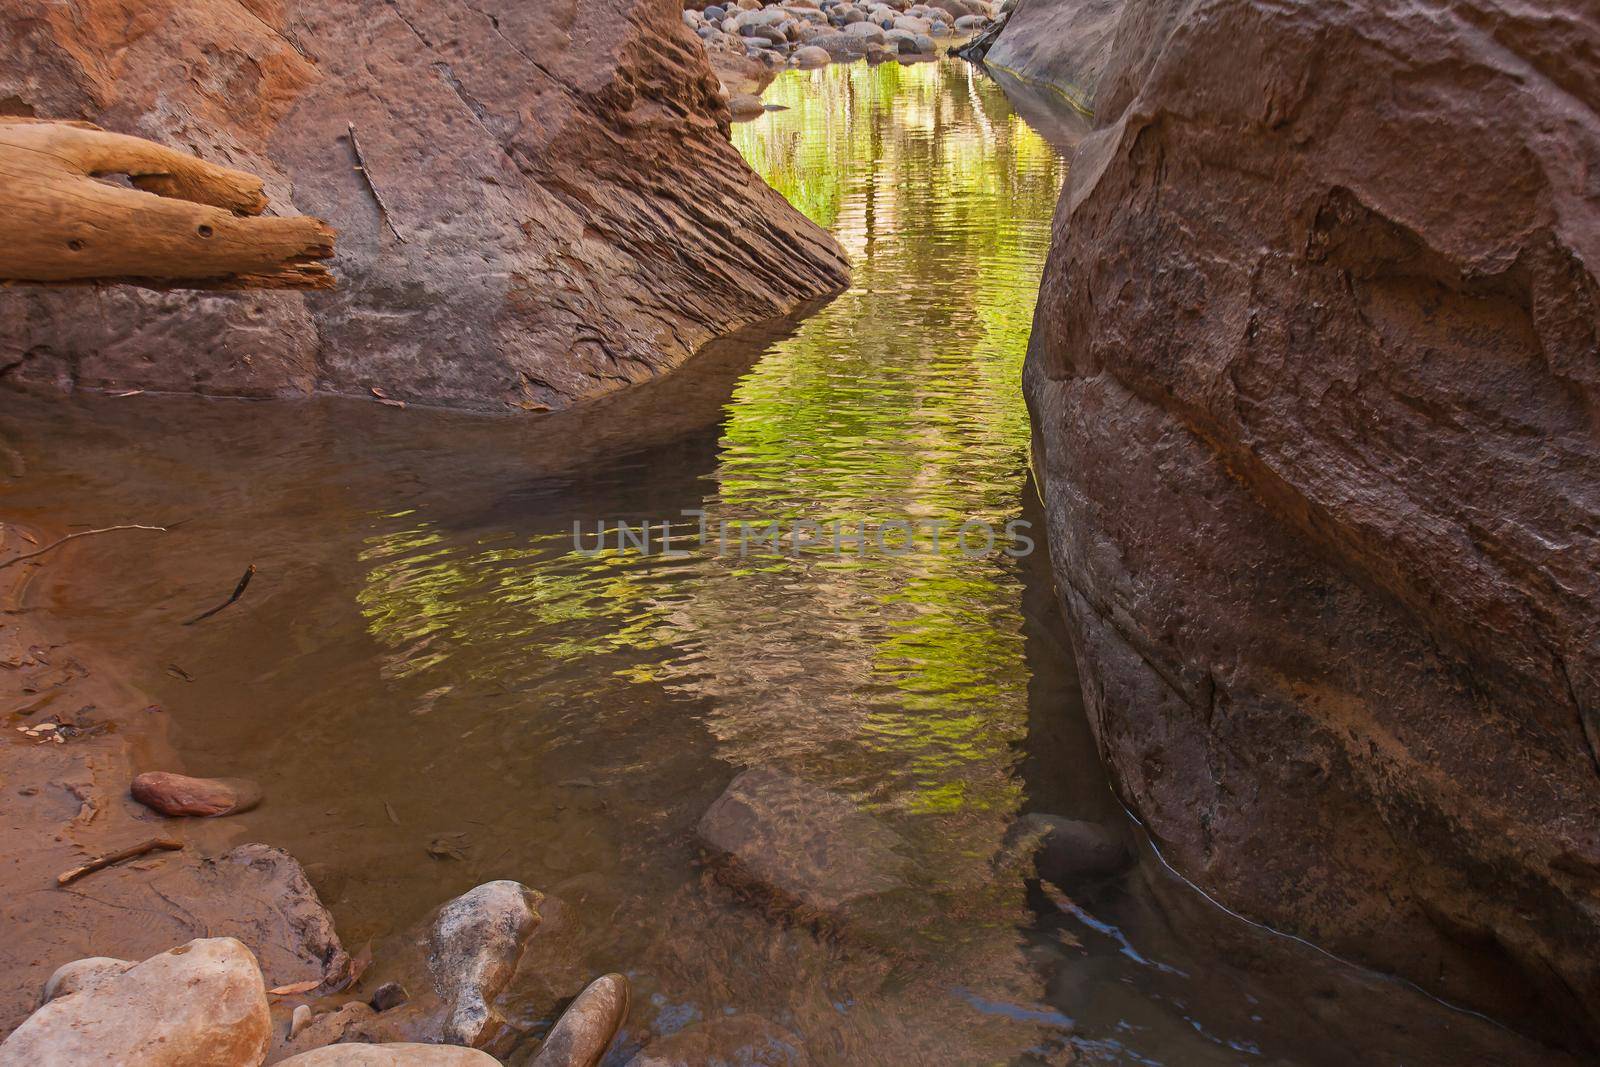 Virgin River Zion National Park 2592 by kobus_peche